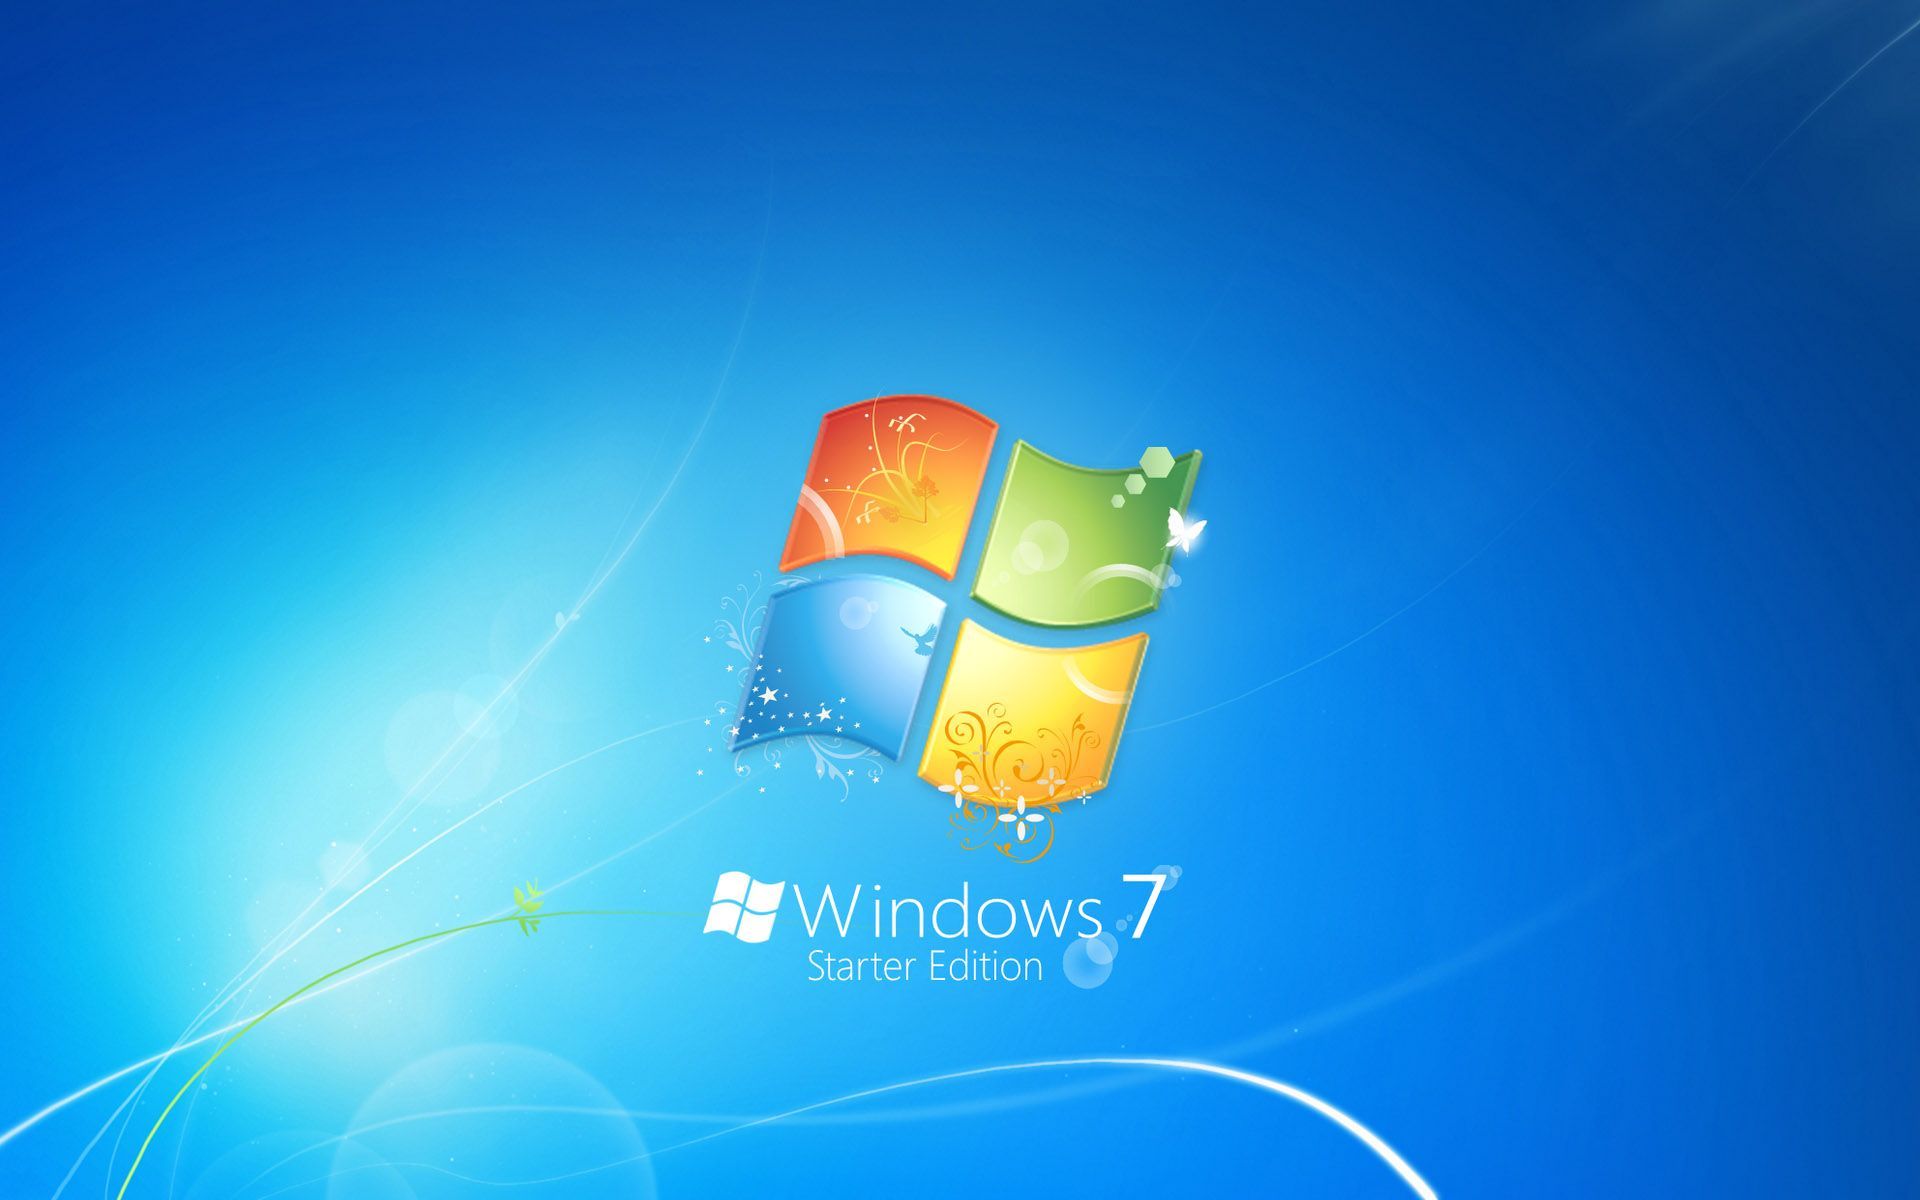 Windows 7 Starter Edition Wallpapers HD Backgrounds